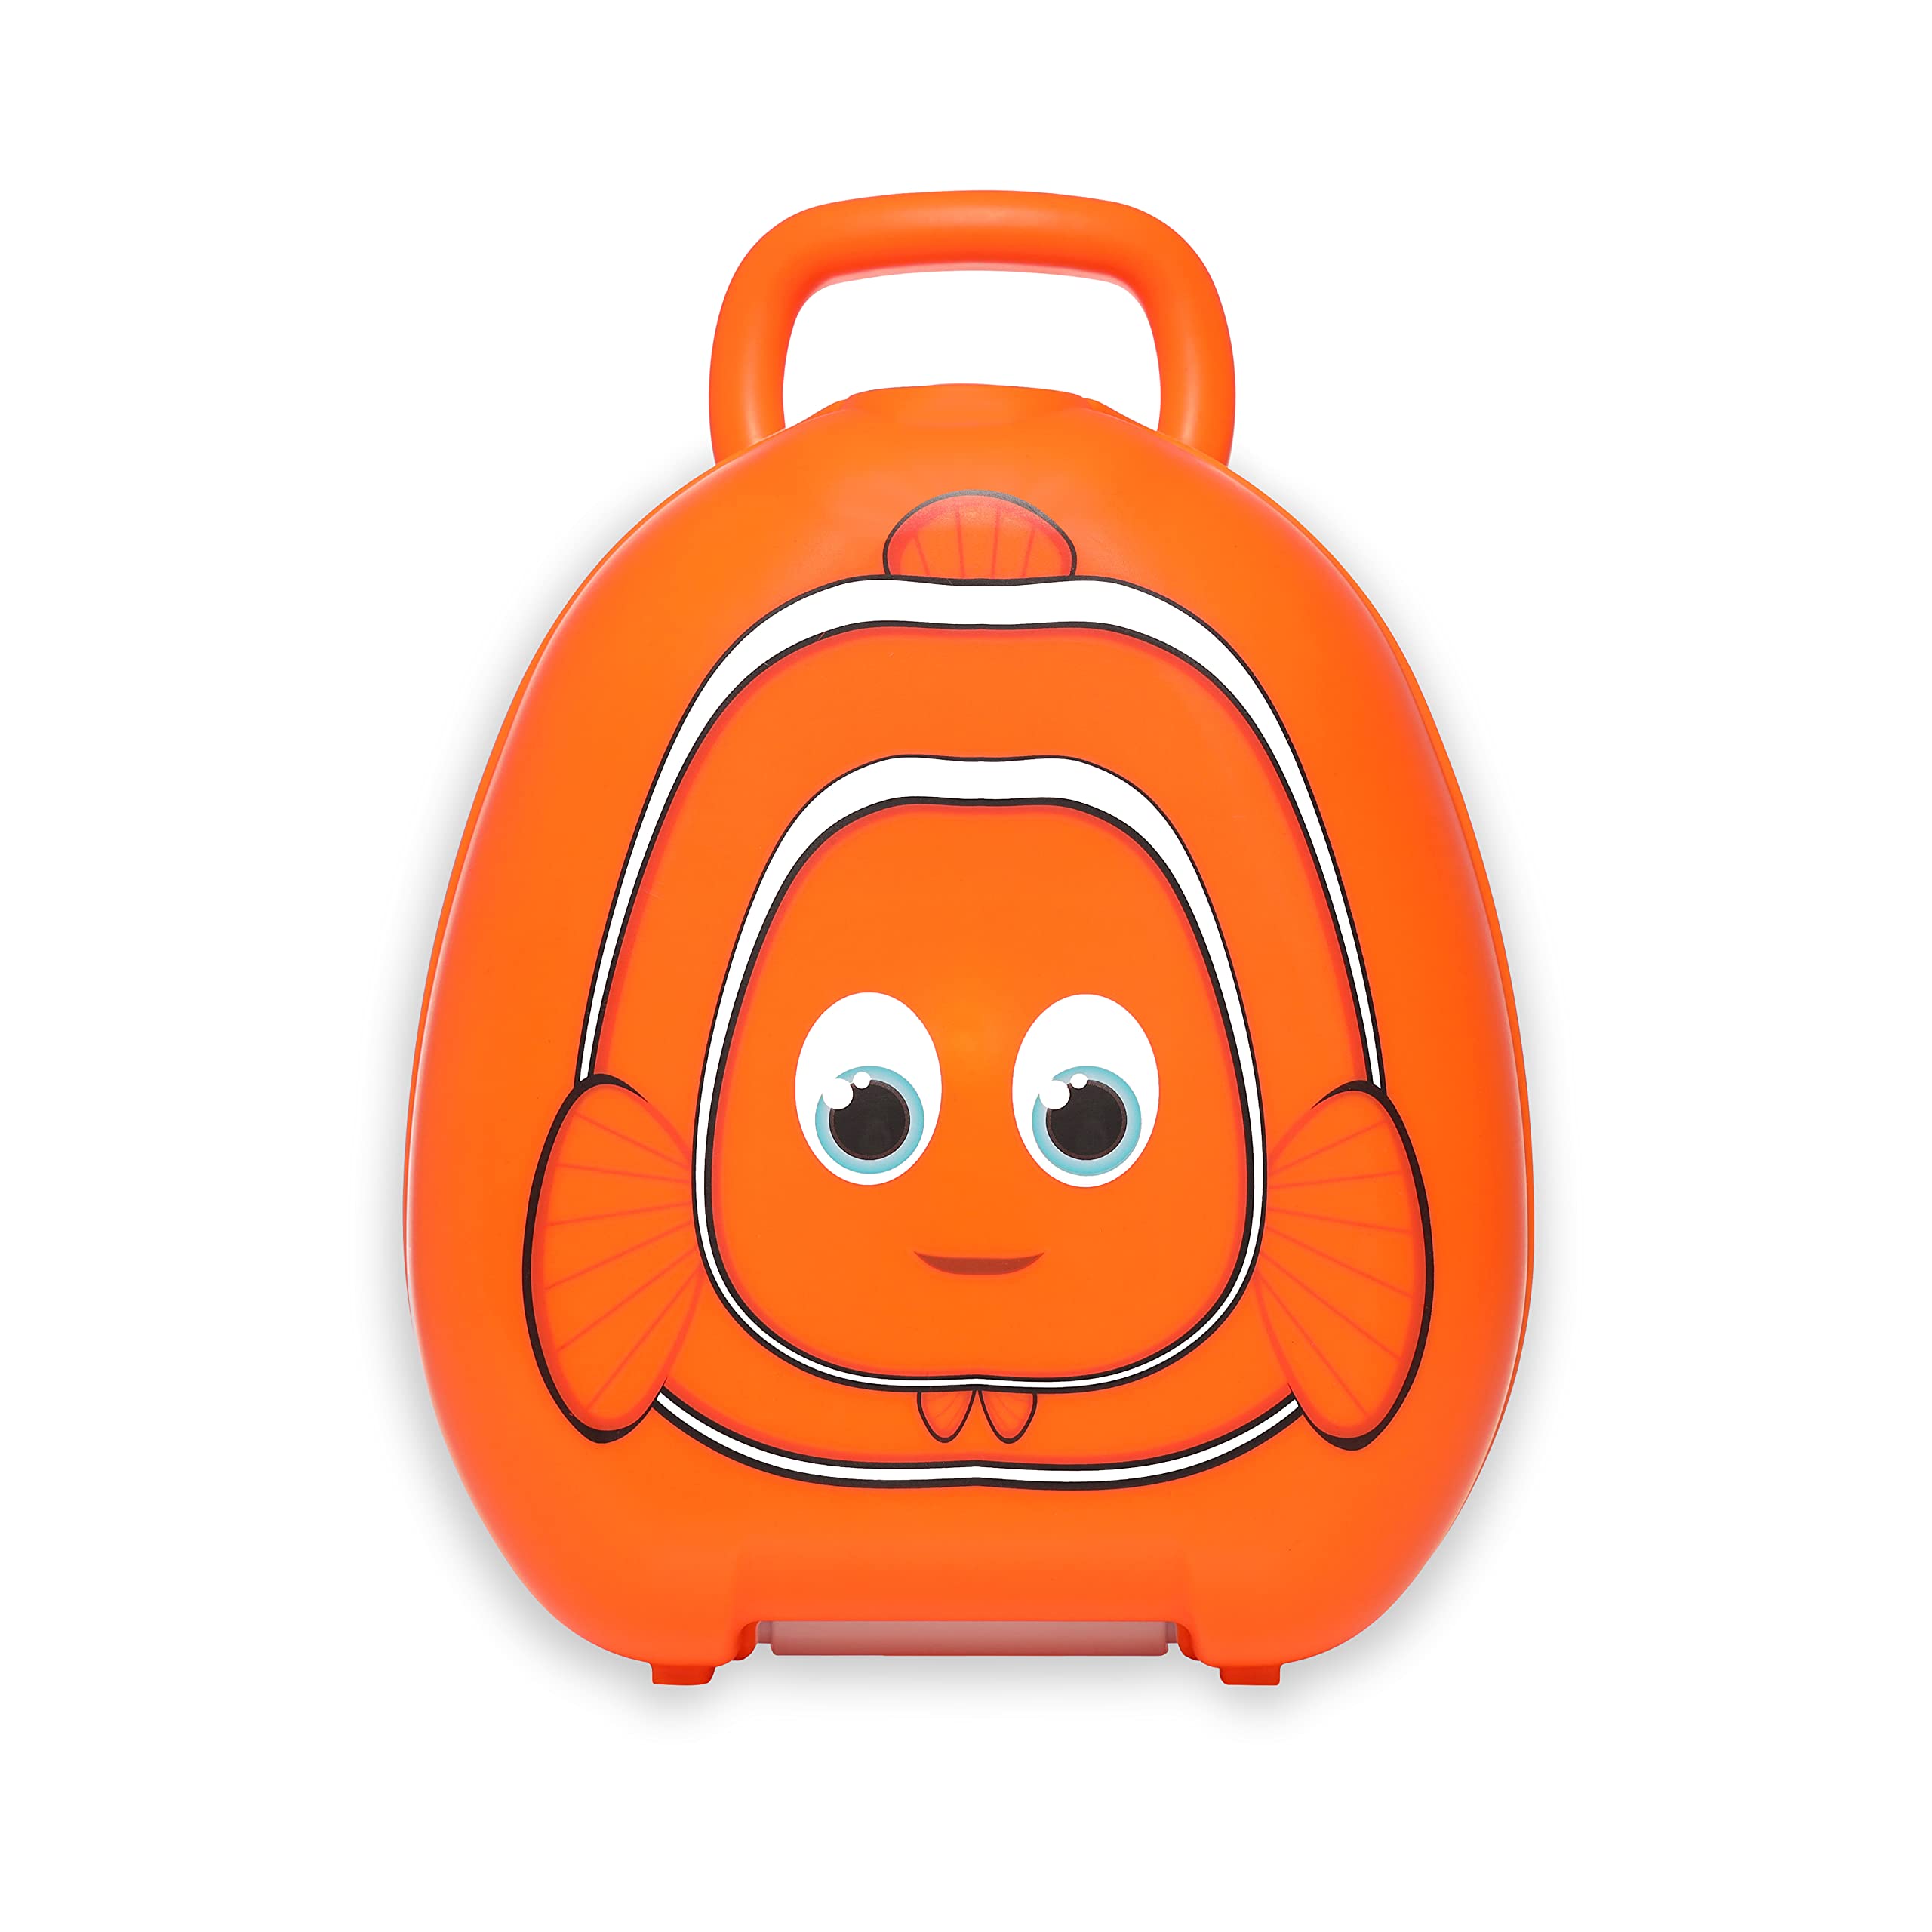 My Carry Potty - Clownfish Travel Potty, Award-Winning Portable Toddler Toilet Seat for Kids to Take Everywhere